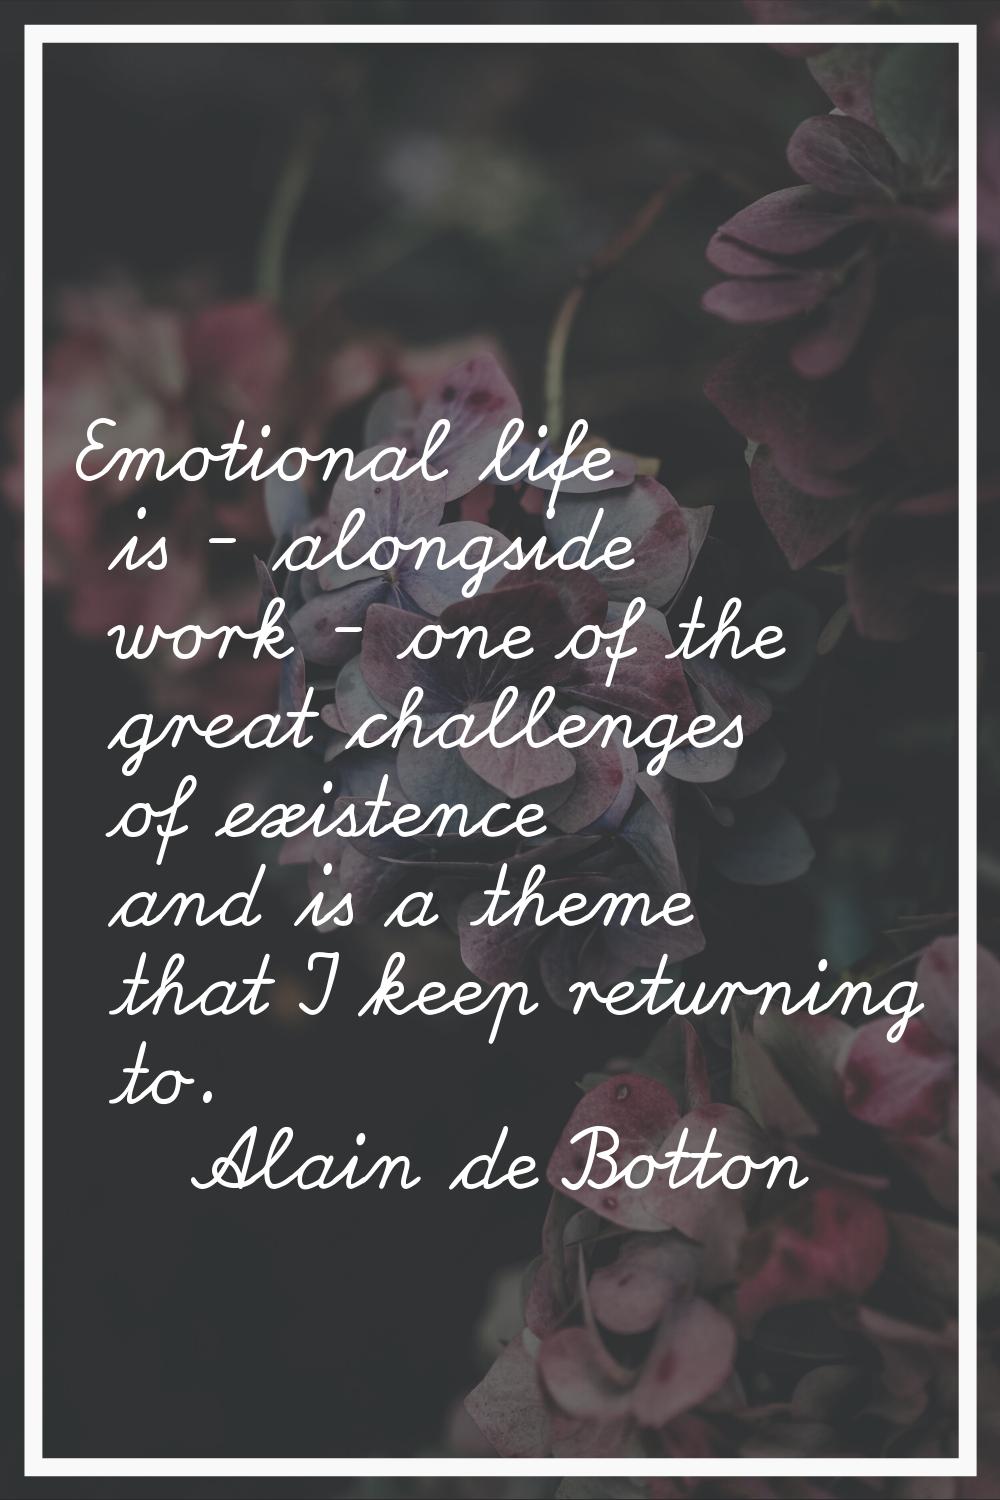 Emotional life is - alongside work - one of the great challenges of existence and is a theme that I